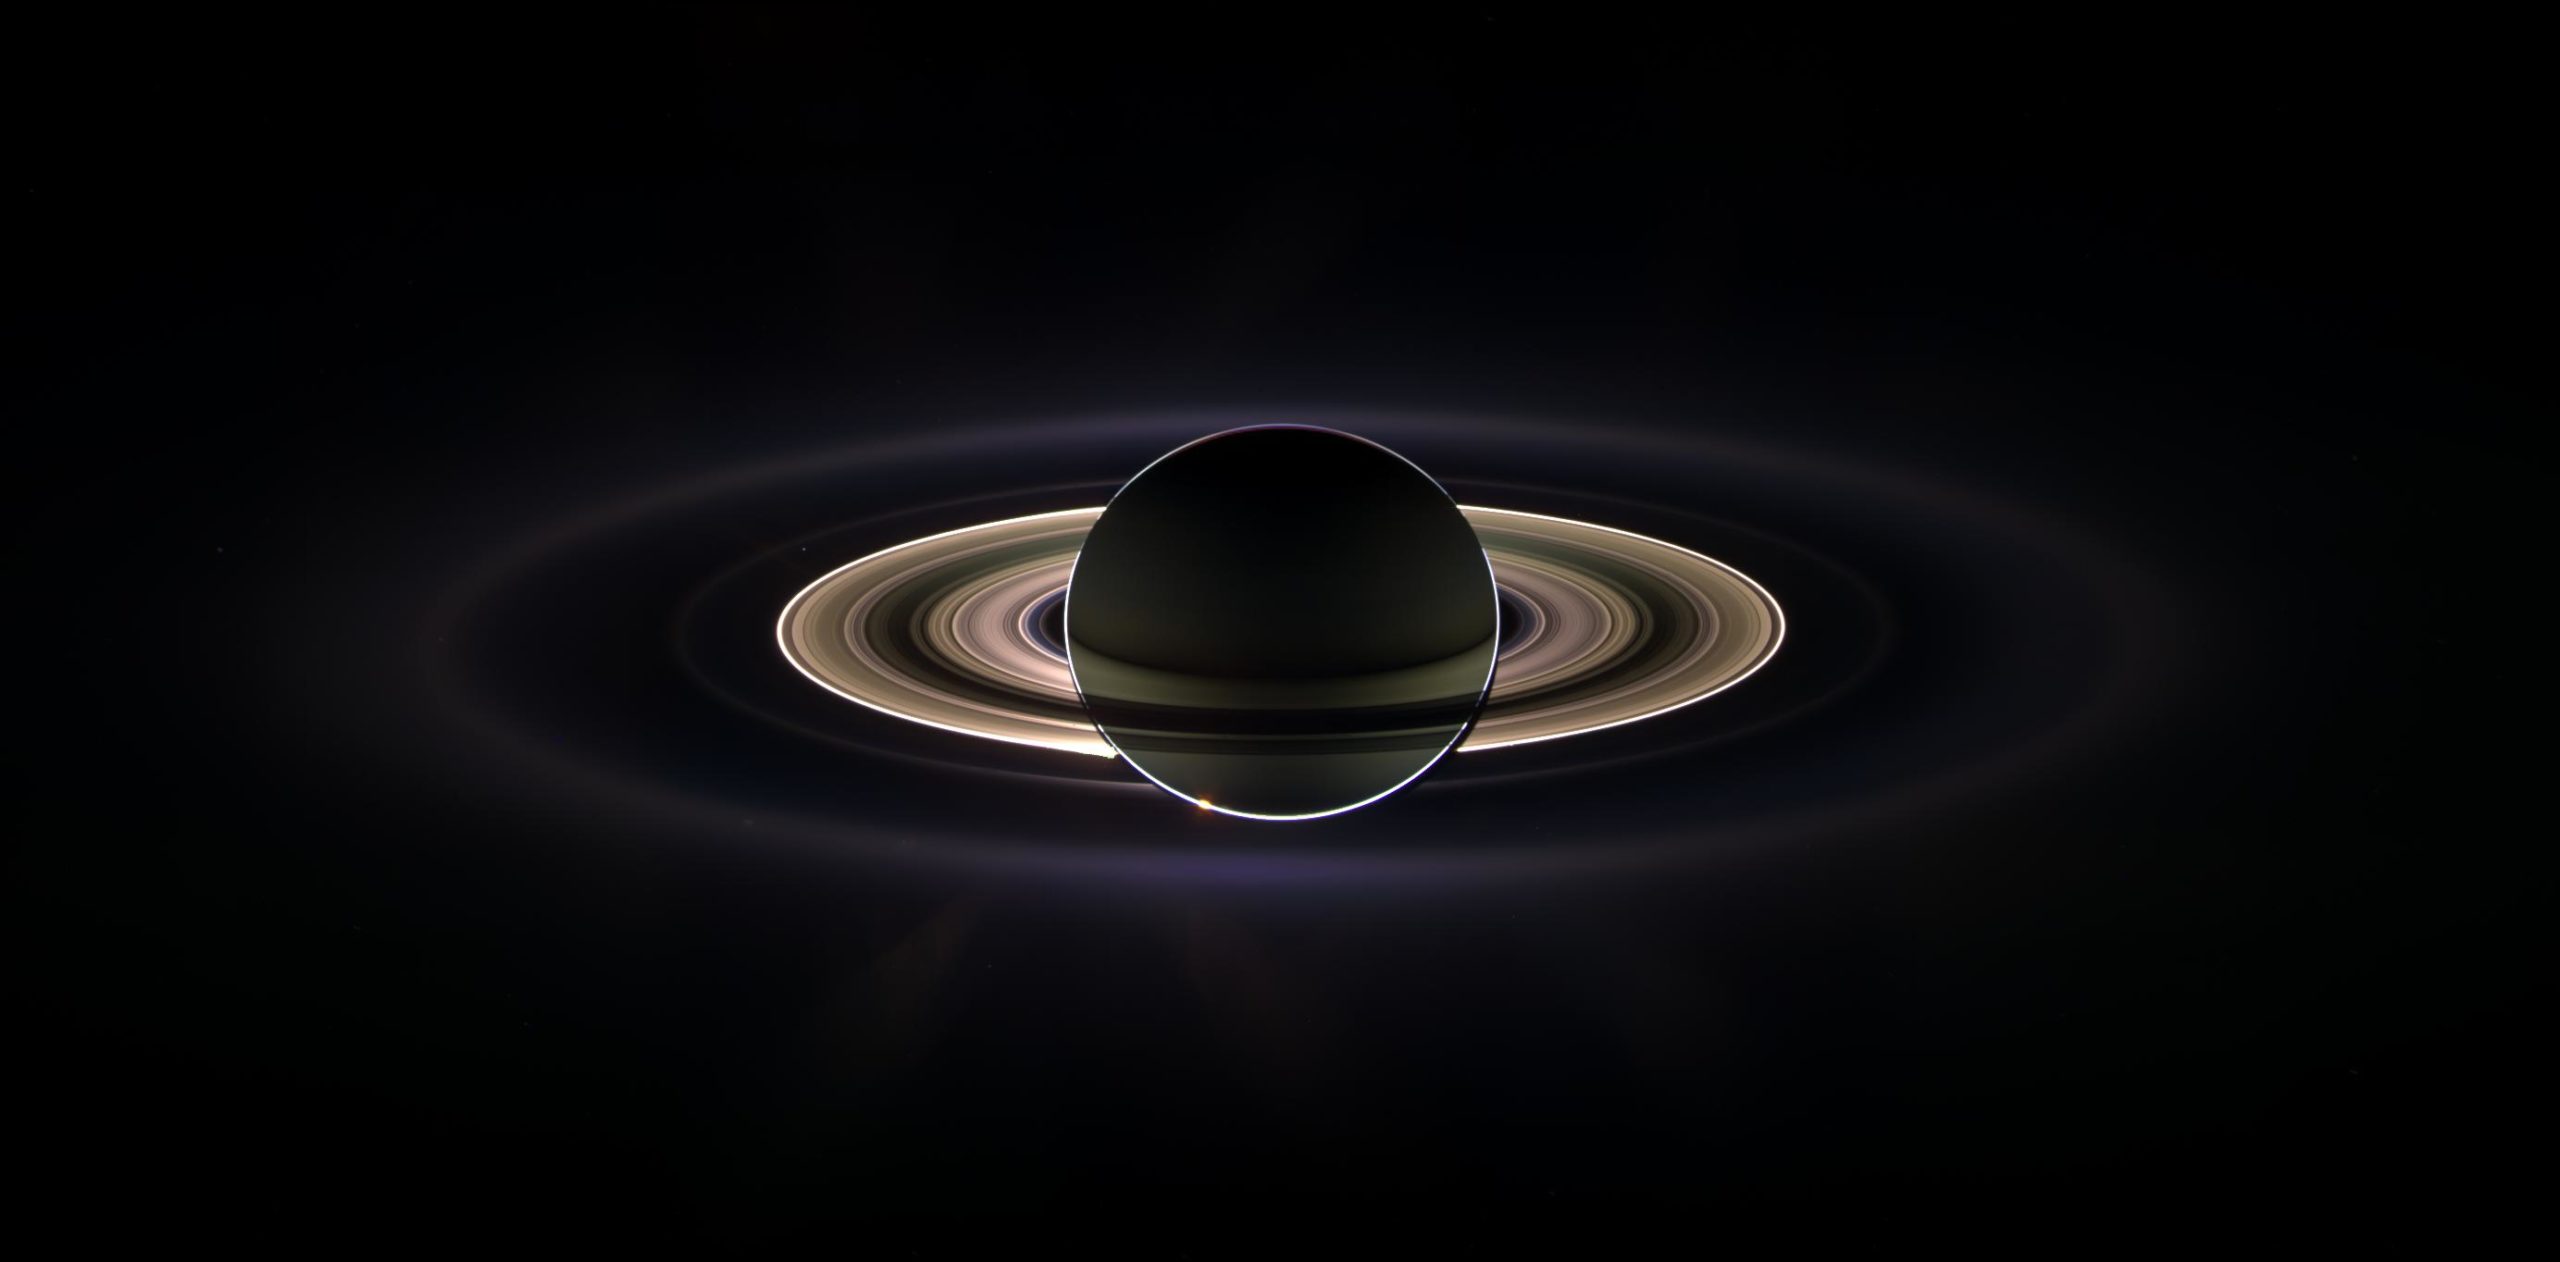 RIP Cassini: A Look Back At The Doomed Probe’s Most Stunning Saturn Pictures